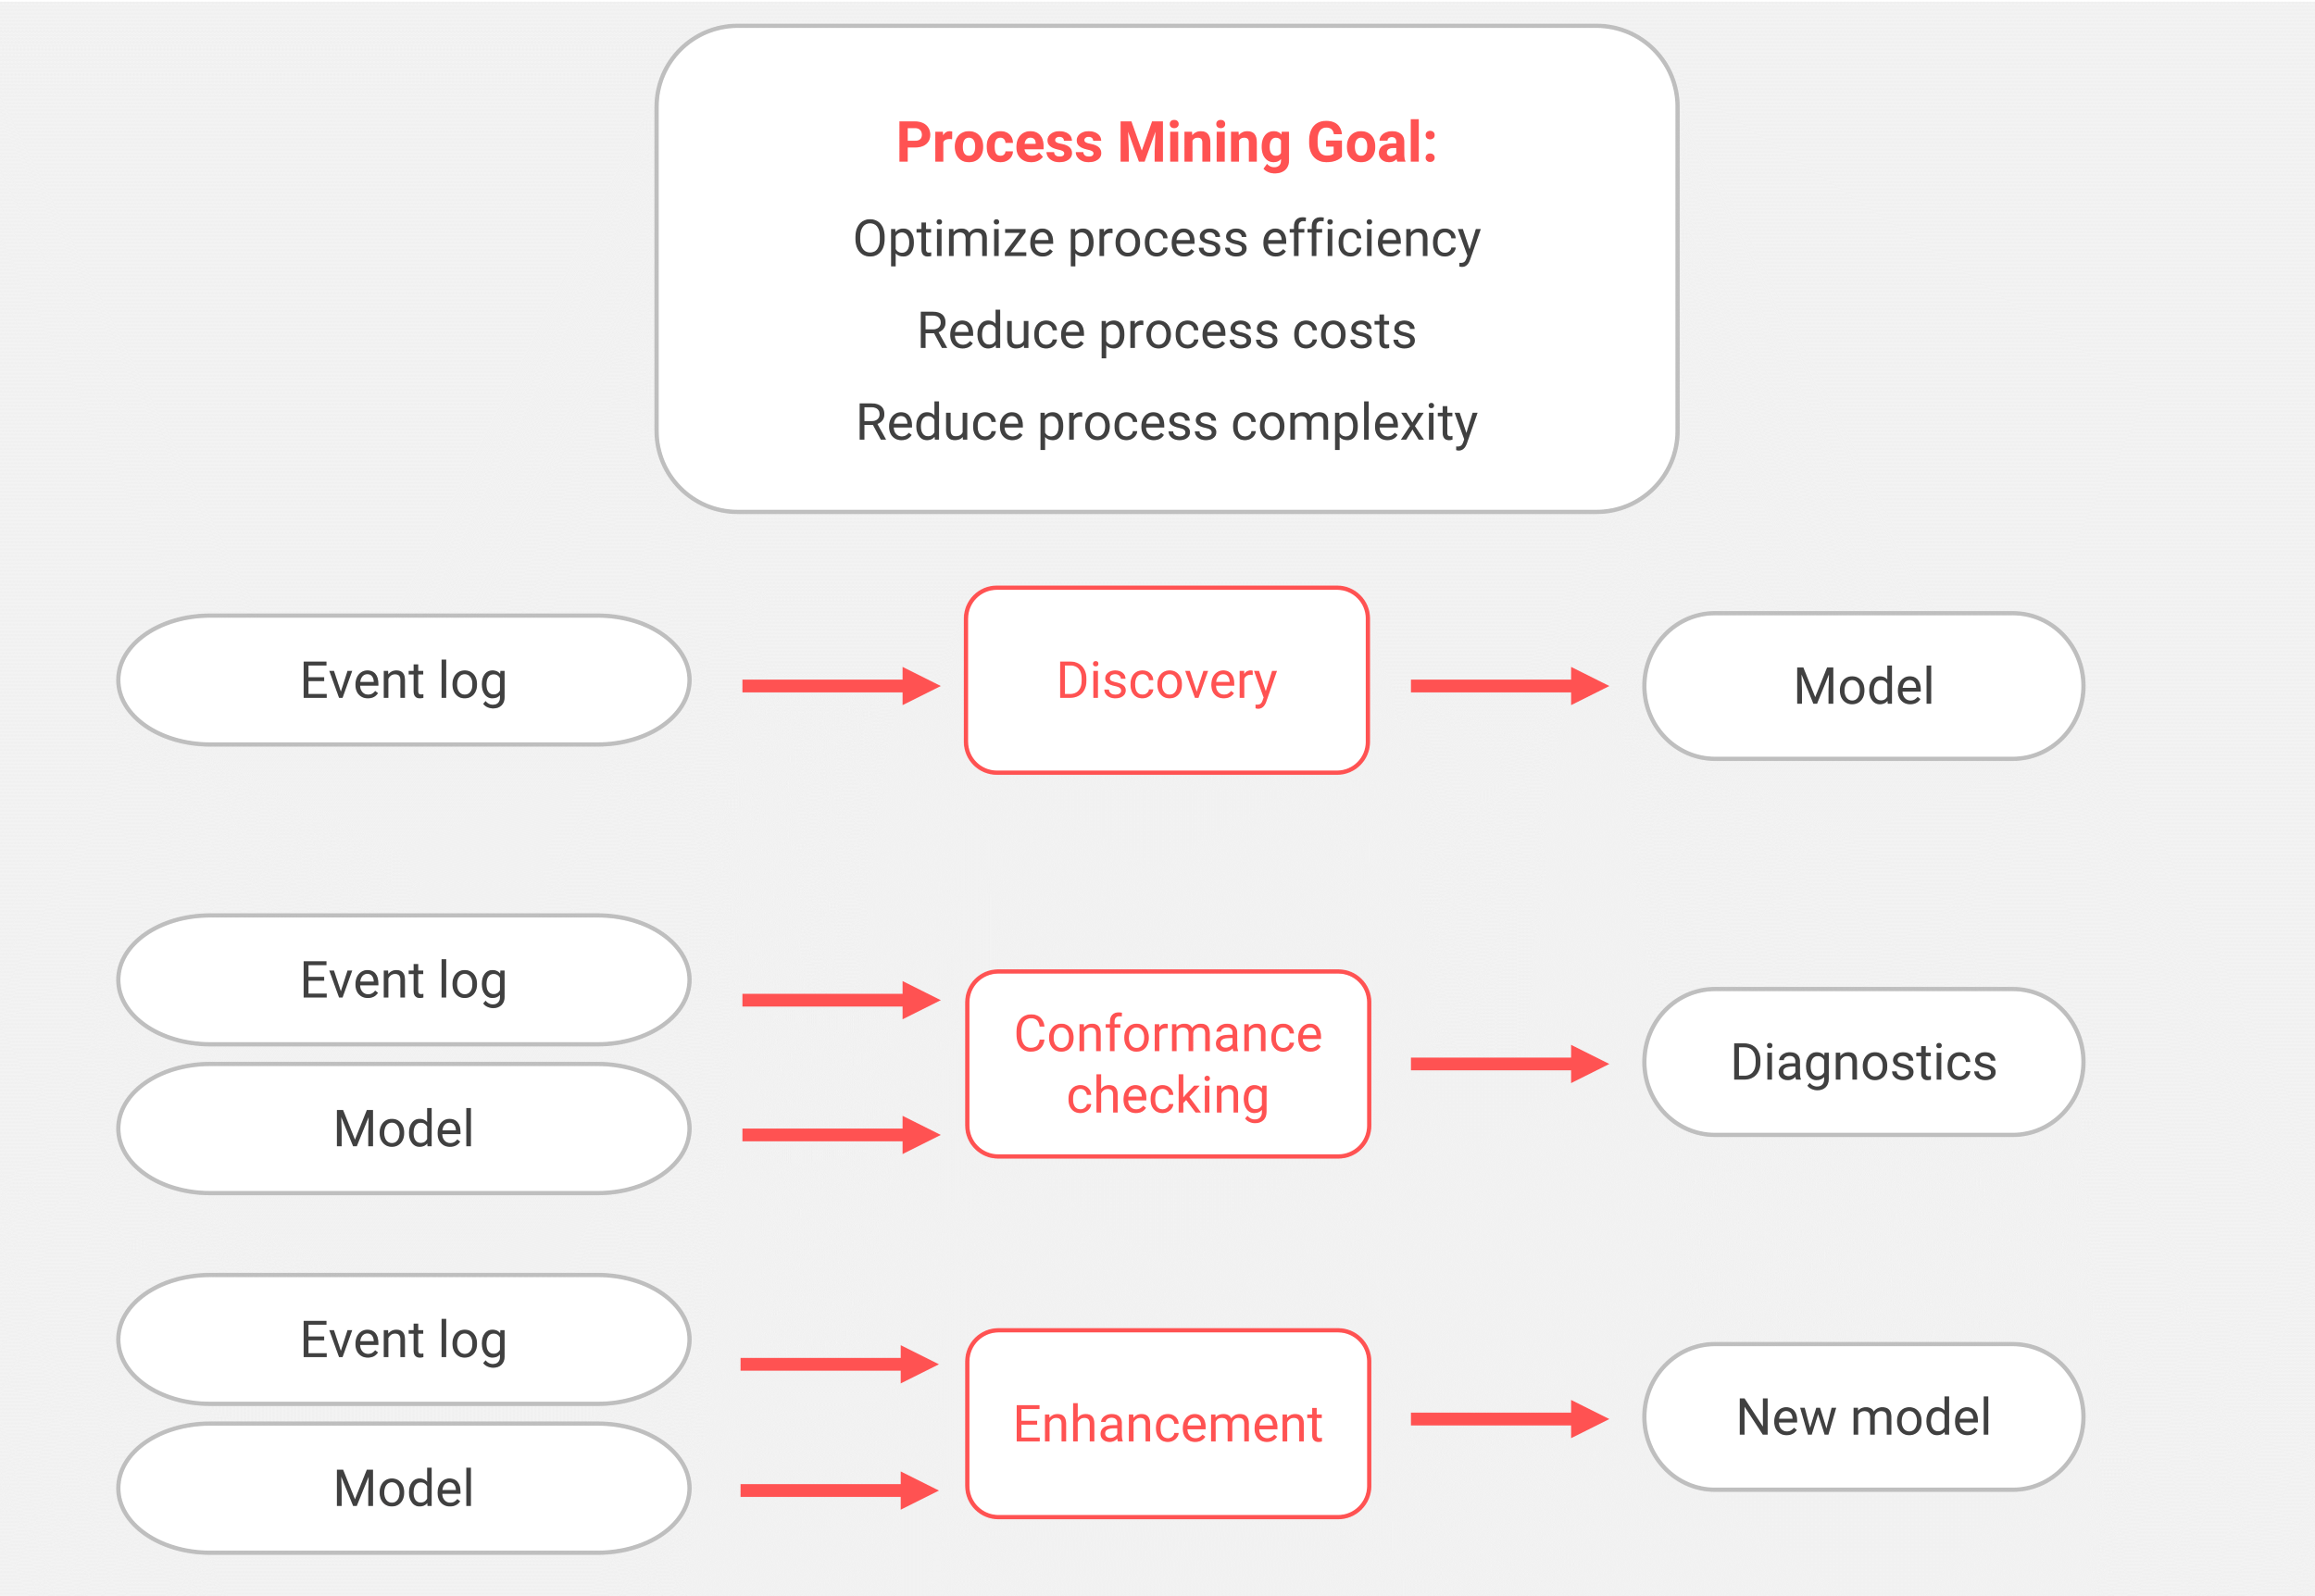 Basic forms of process mining